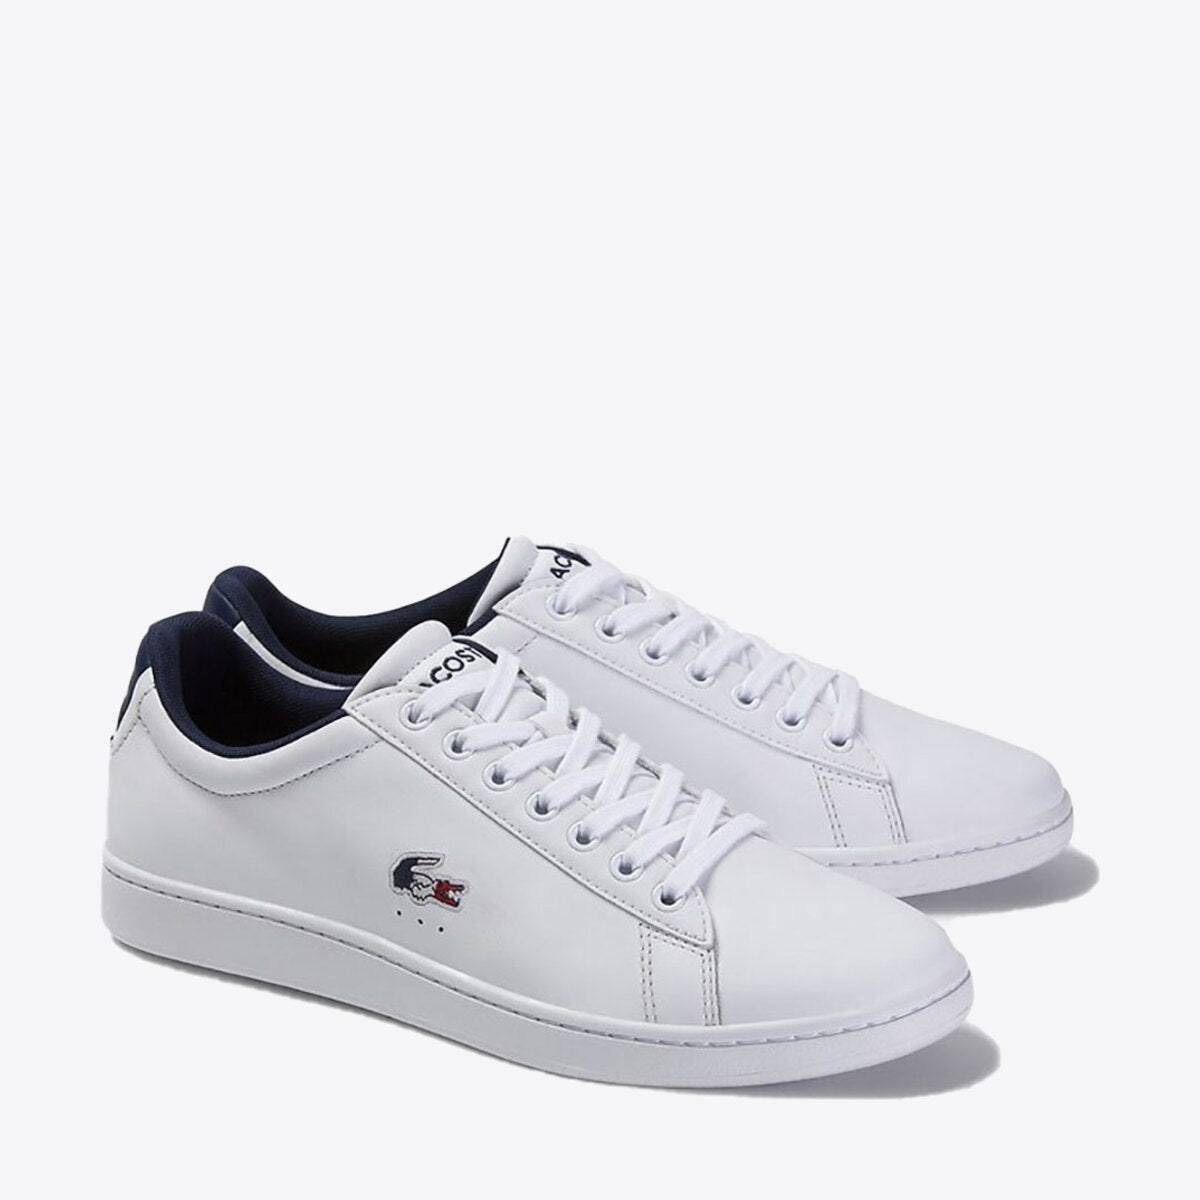 LACOSTE Carnaby Evo Tri1 Sneaker White/Navy/Red - Image 0